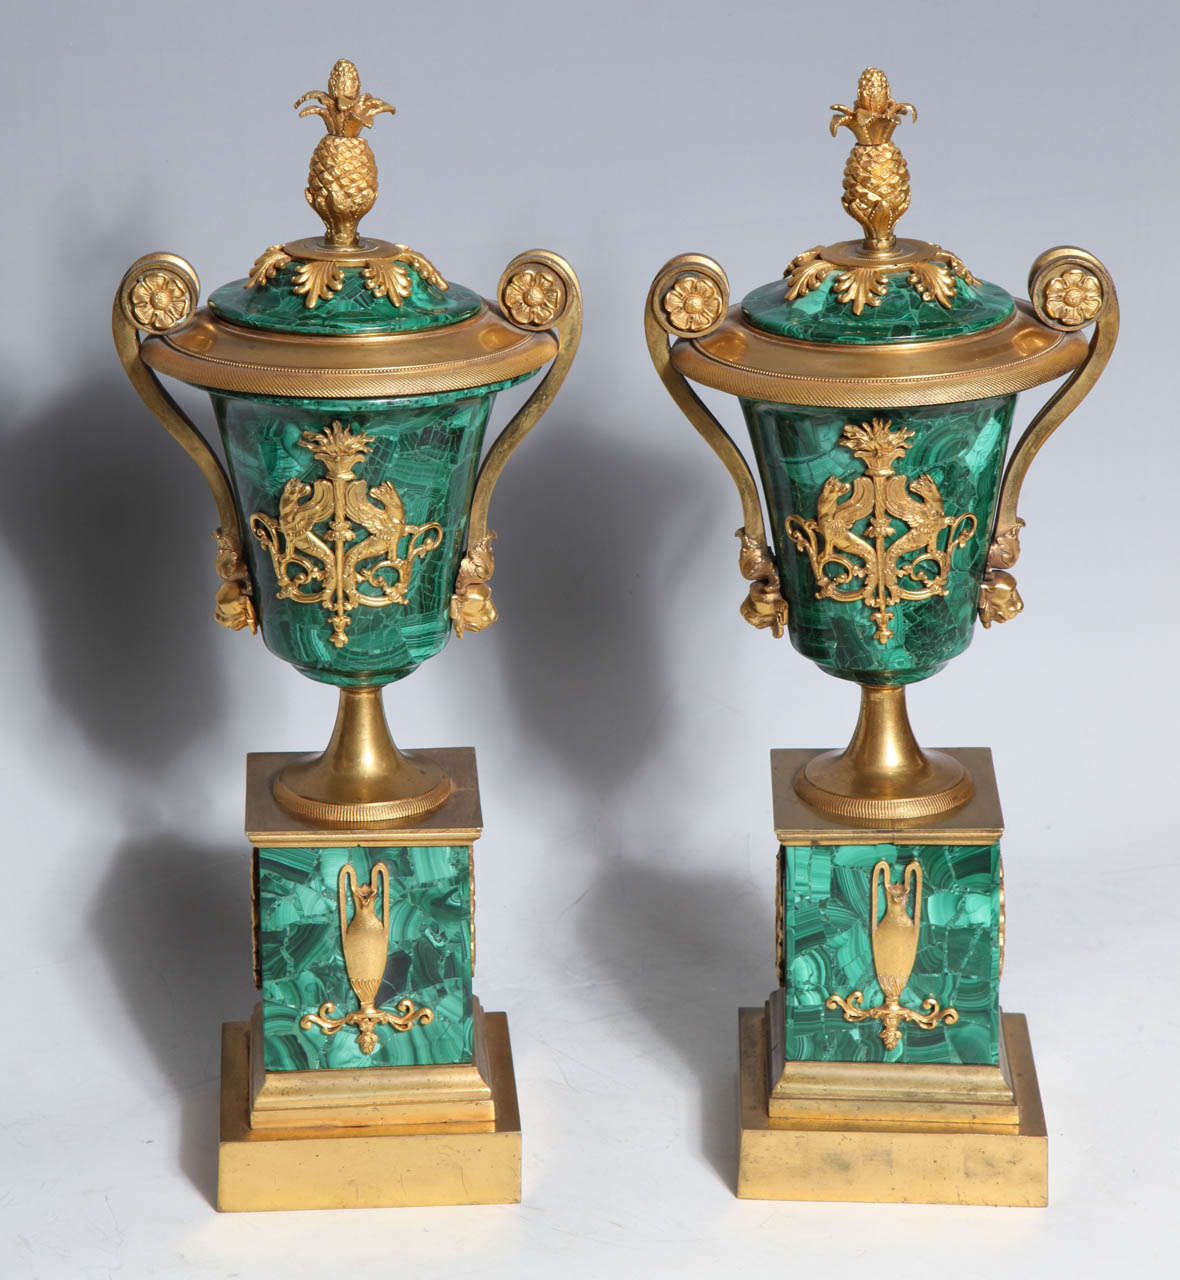 A Fine Pair of Antique Russian Empire Ormolu Mounted Malachite Covered Vases 4